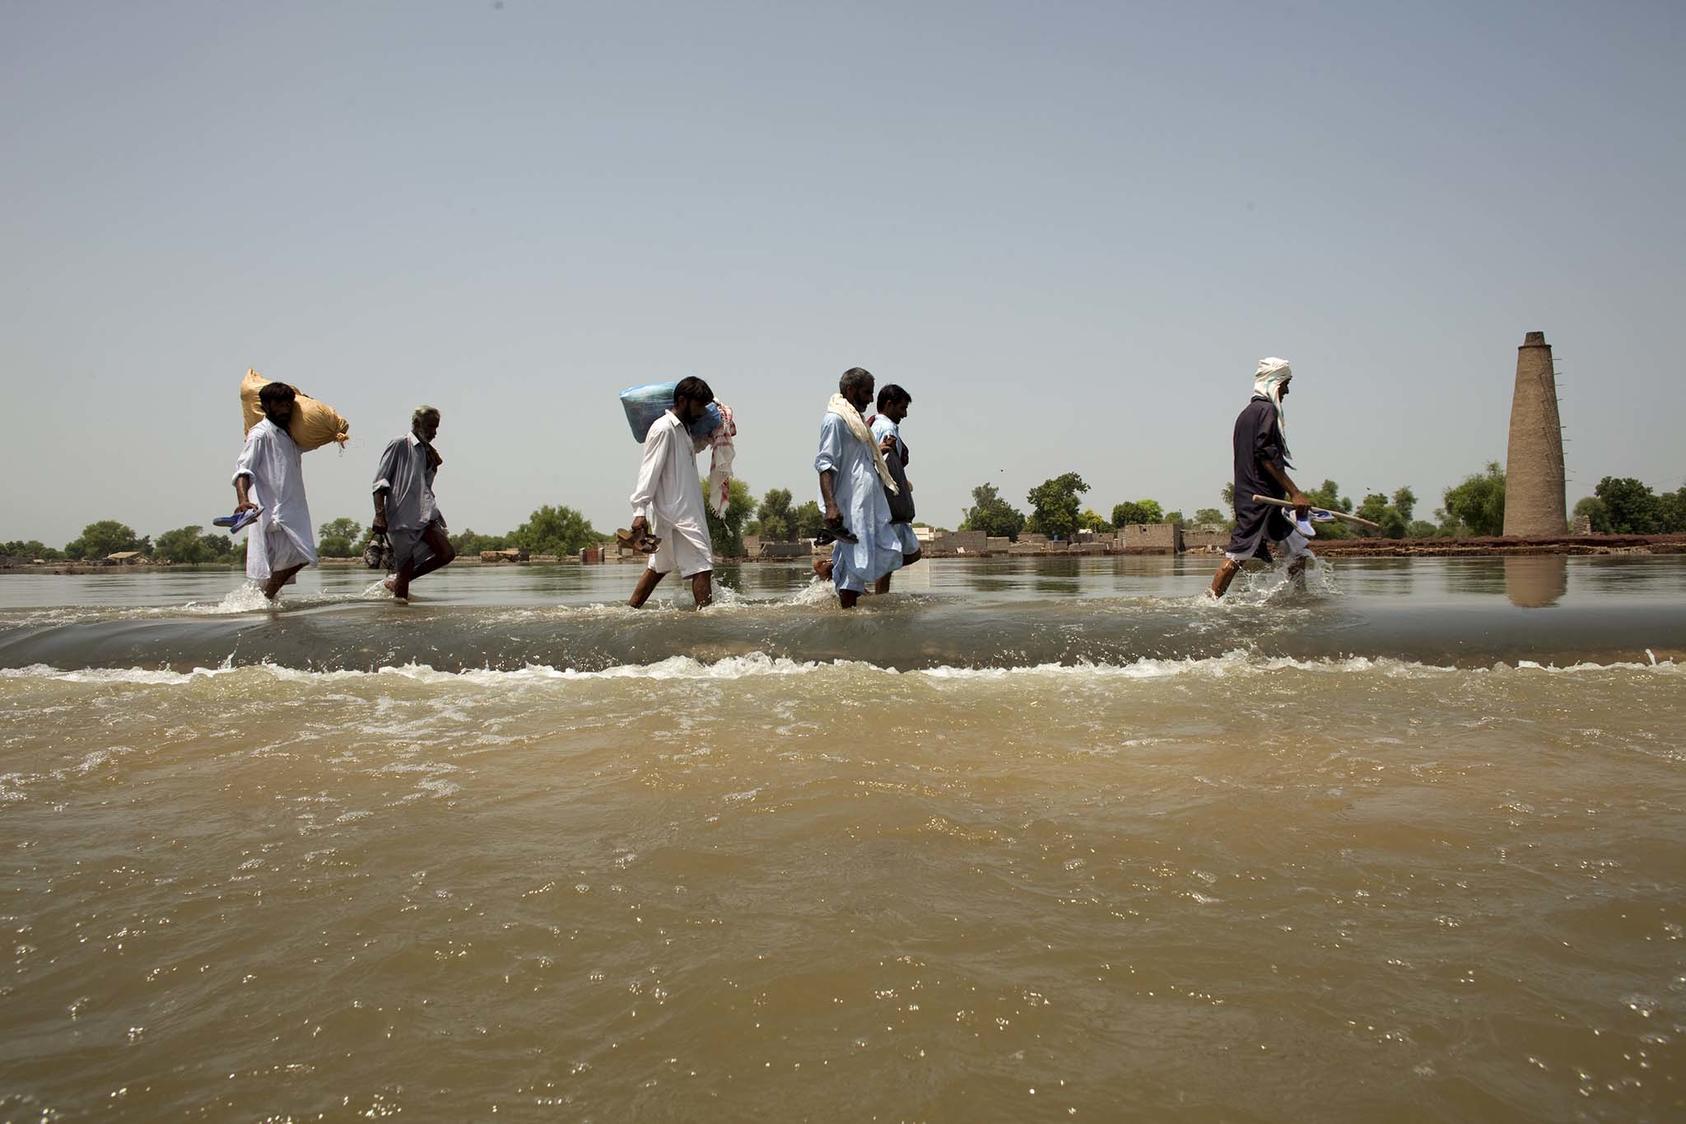 Pakistanis walk across the main highway on the border of the Sindh and Punjab provinces of southern Pakistan, Aug. 22, 2010. (Tyler Hicks/The New York Times)